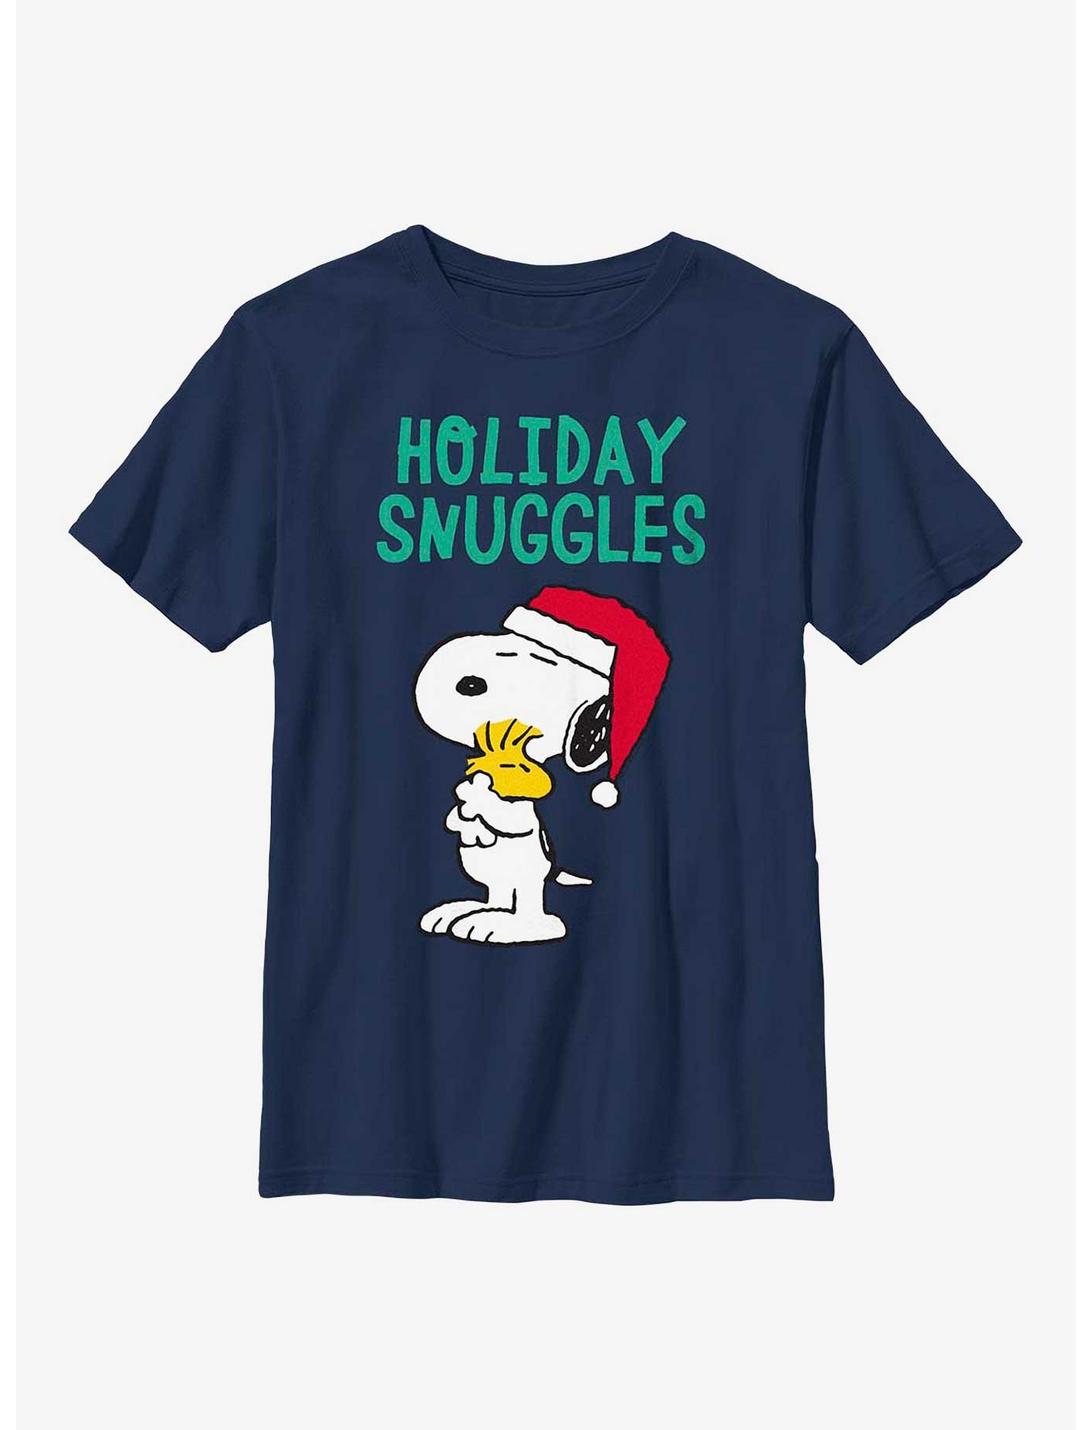 Peanuts Snoopy and Woodstock Holiday Snuggles Youth T-Shirt, NAVY, hi-res